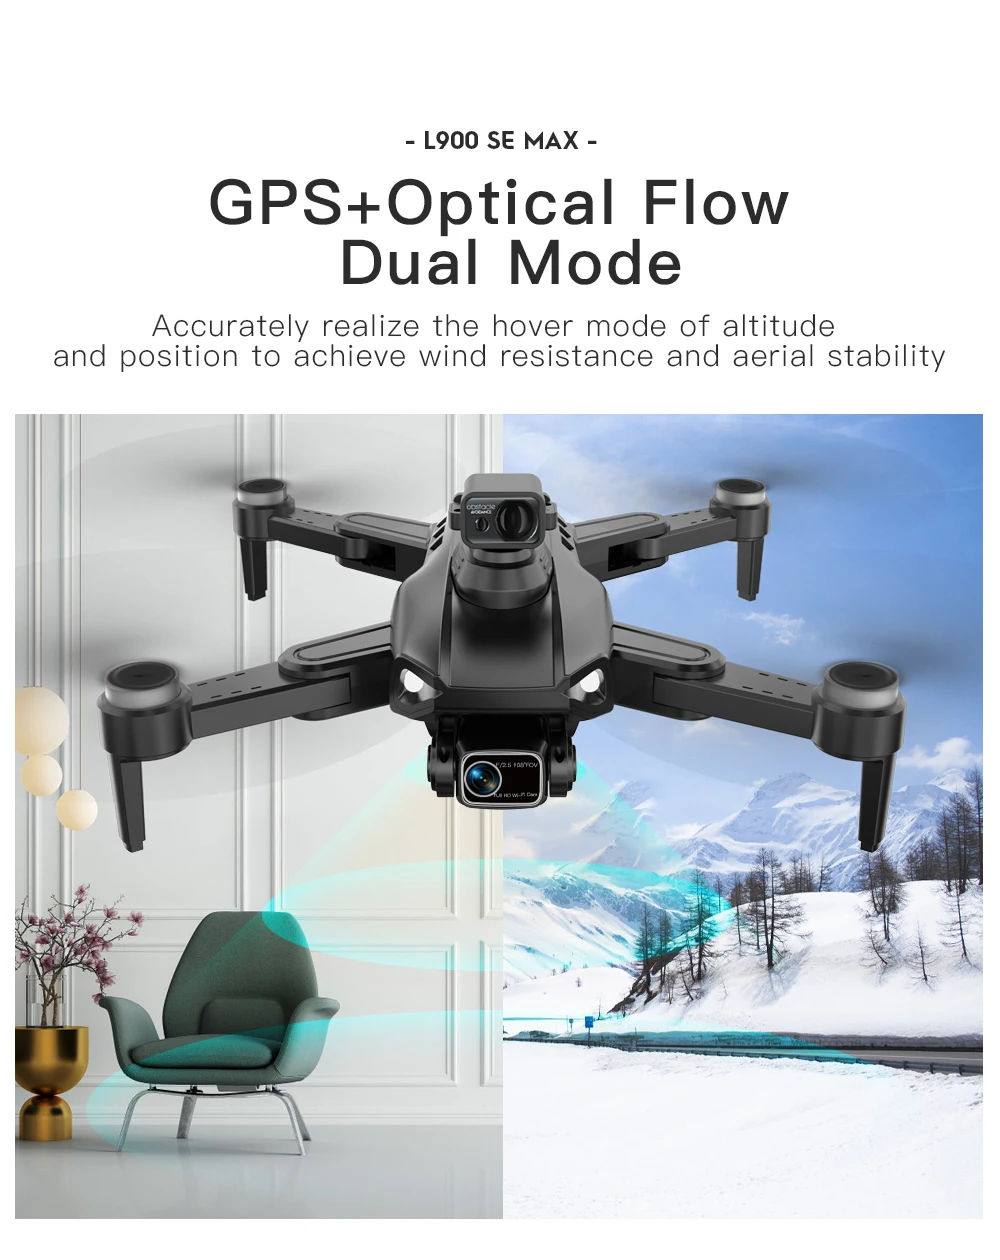 4K ESC GPS Follow Me Brushless Remote Control Drone 1200M GPS Optical Flow  Dual Position Avoid Obstacles FPV RC Drone Quadcopter